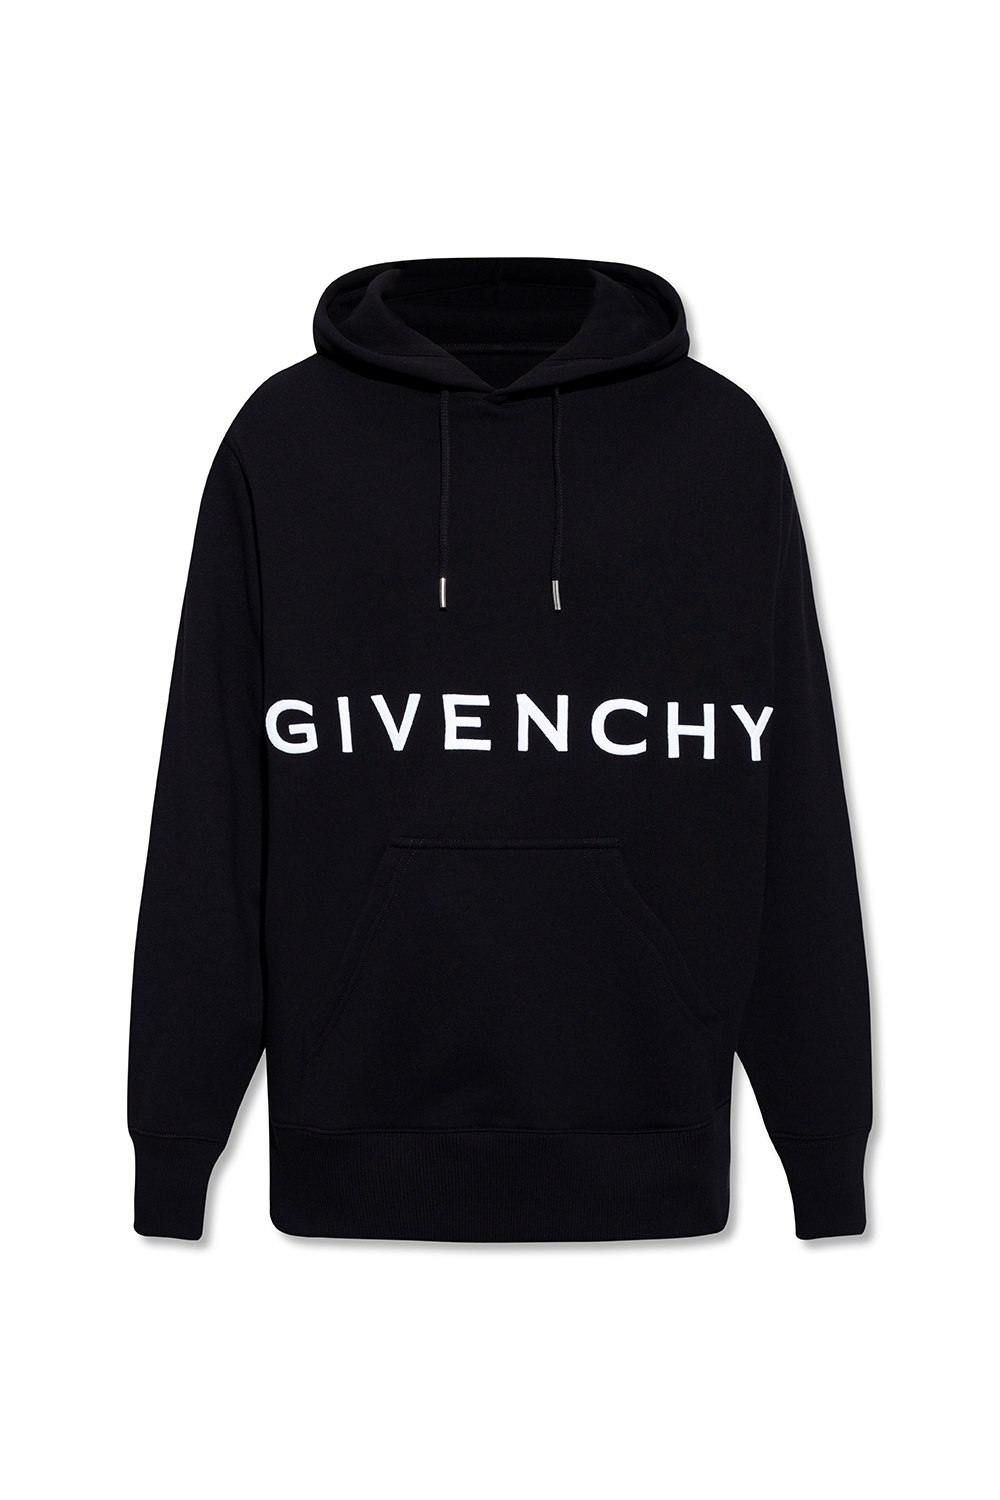 Givenchy Oversize graphicie | Men's Givenchy Socks | Men's Clothing |  StclaircomoShops